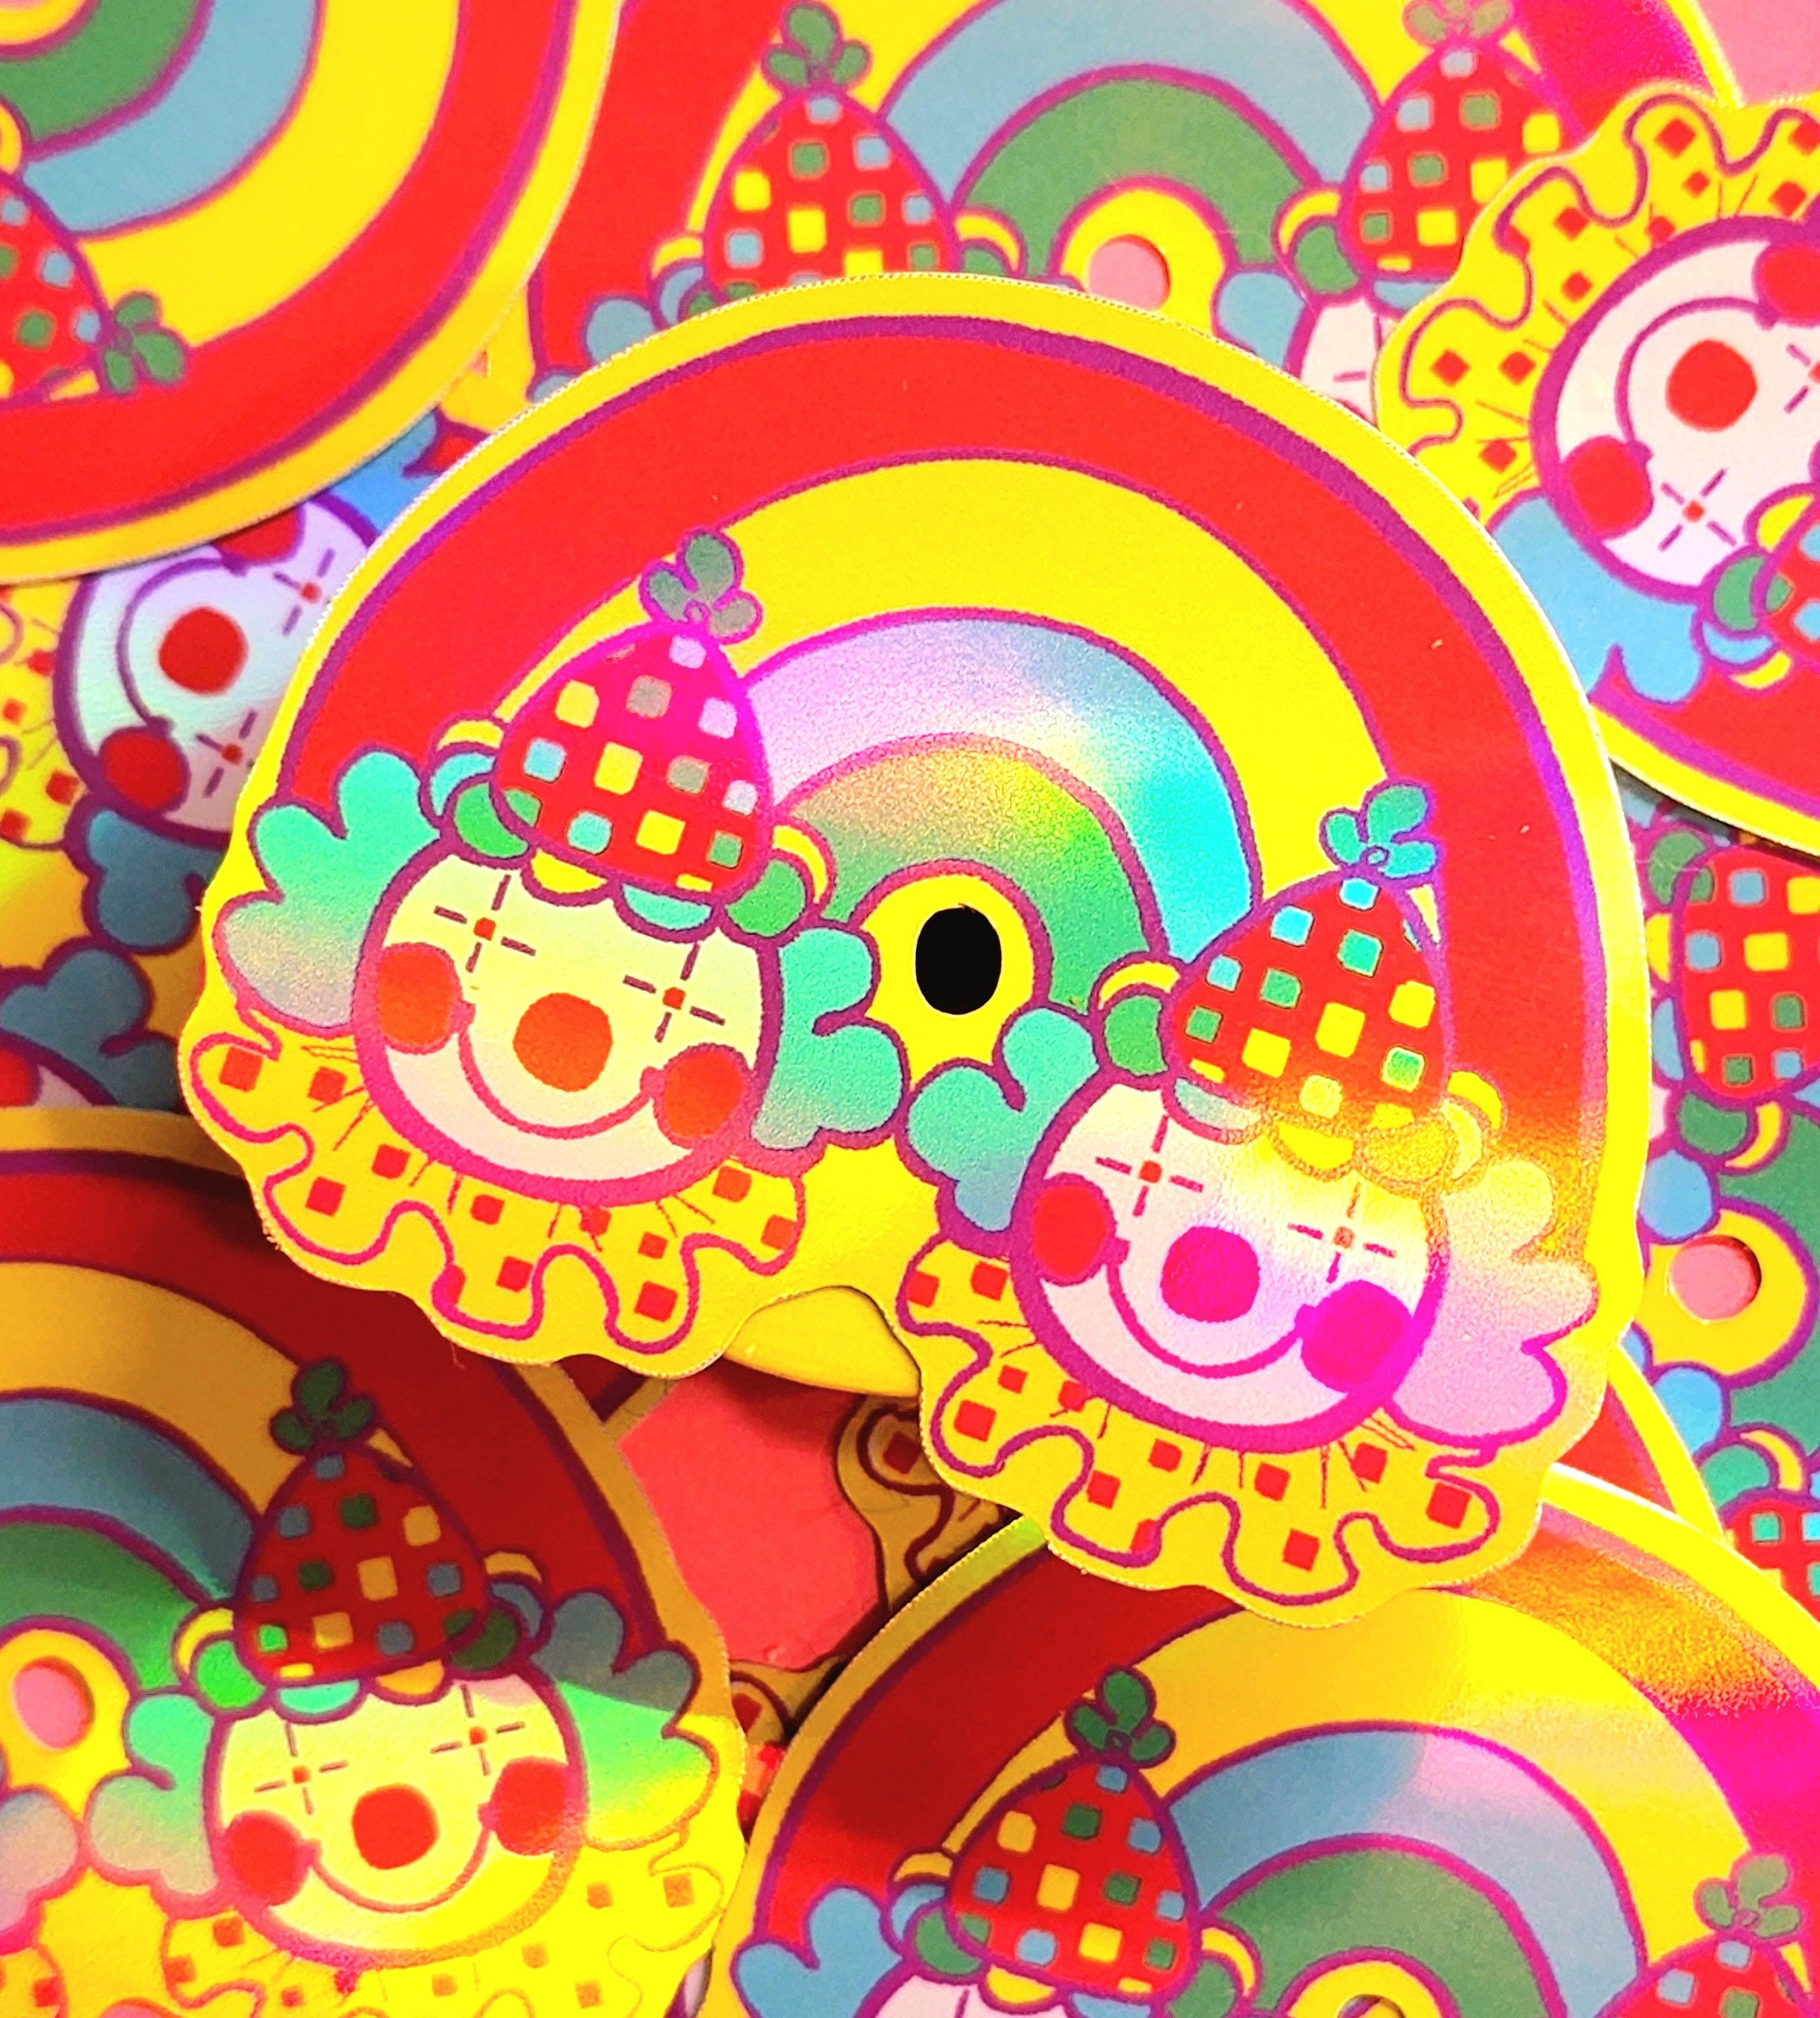 A pile of colorful stickers with clowns on them. - Clowncore